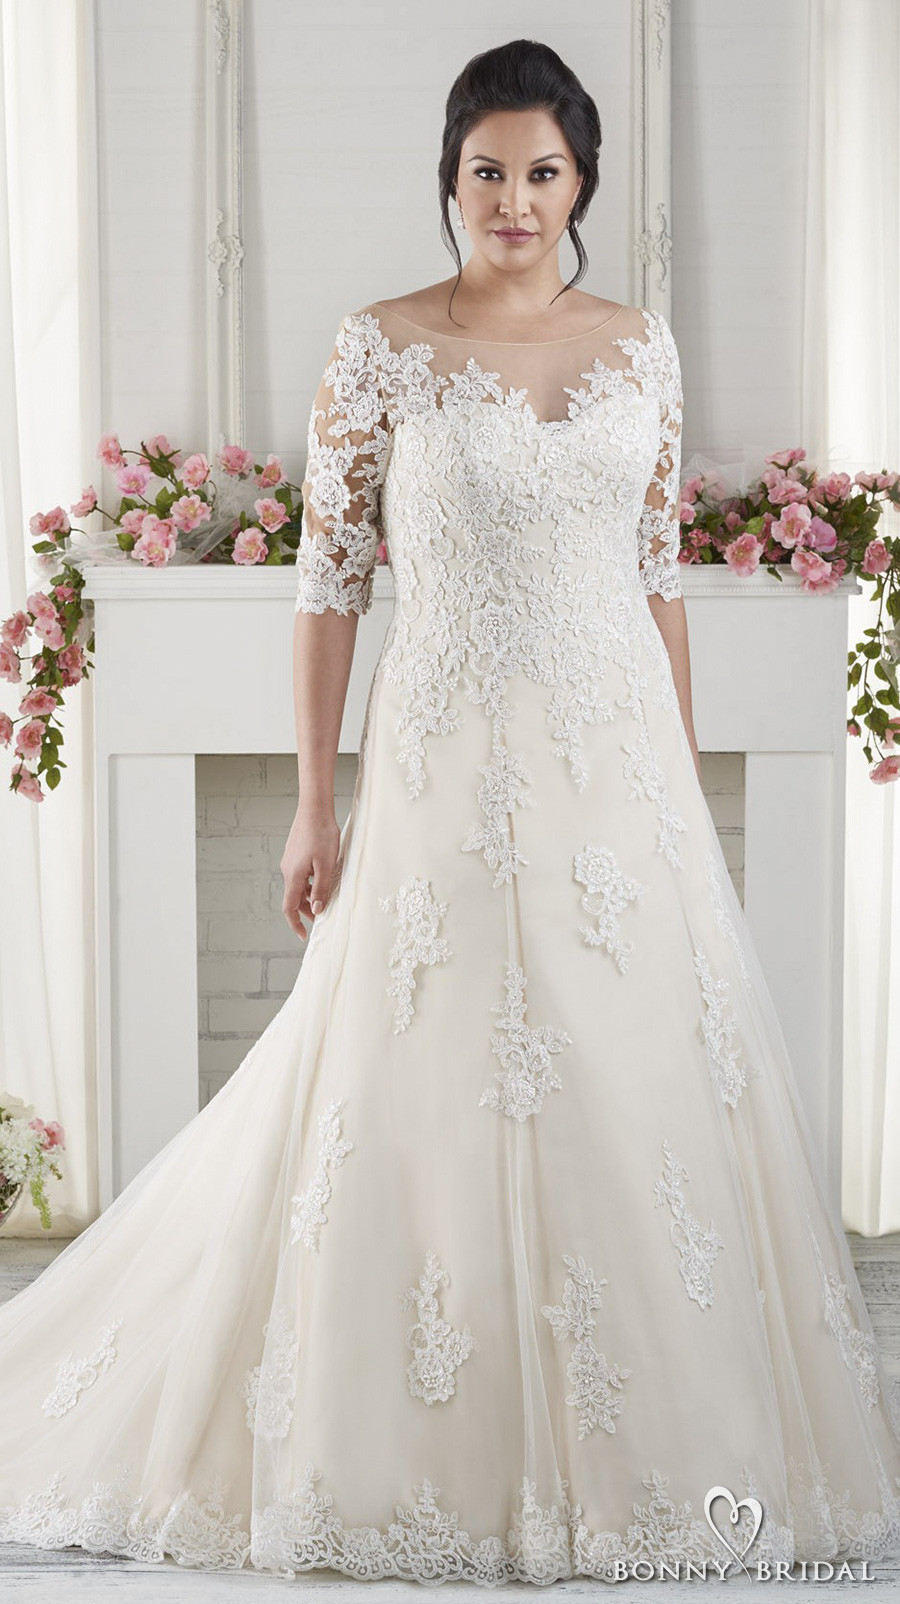 Wedding Dresses Plus Size With Sleeves
 Bonny Bridal Wedding Dresses — Unfor table Styles for